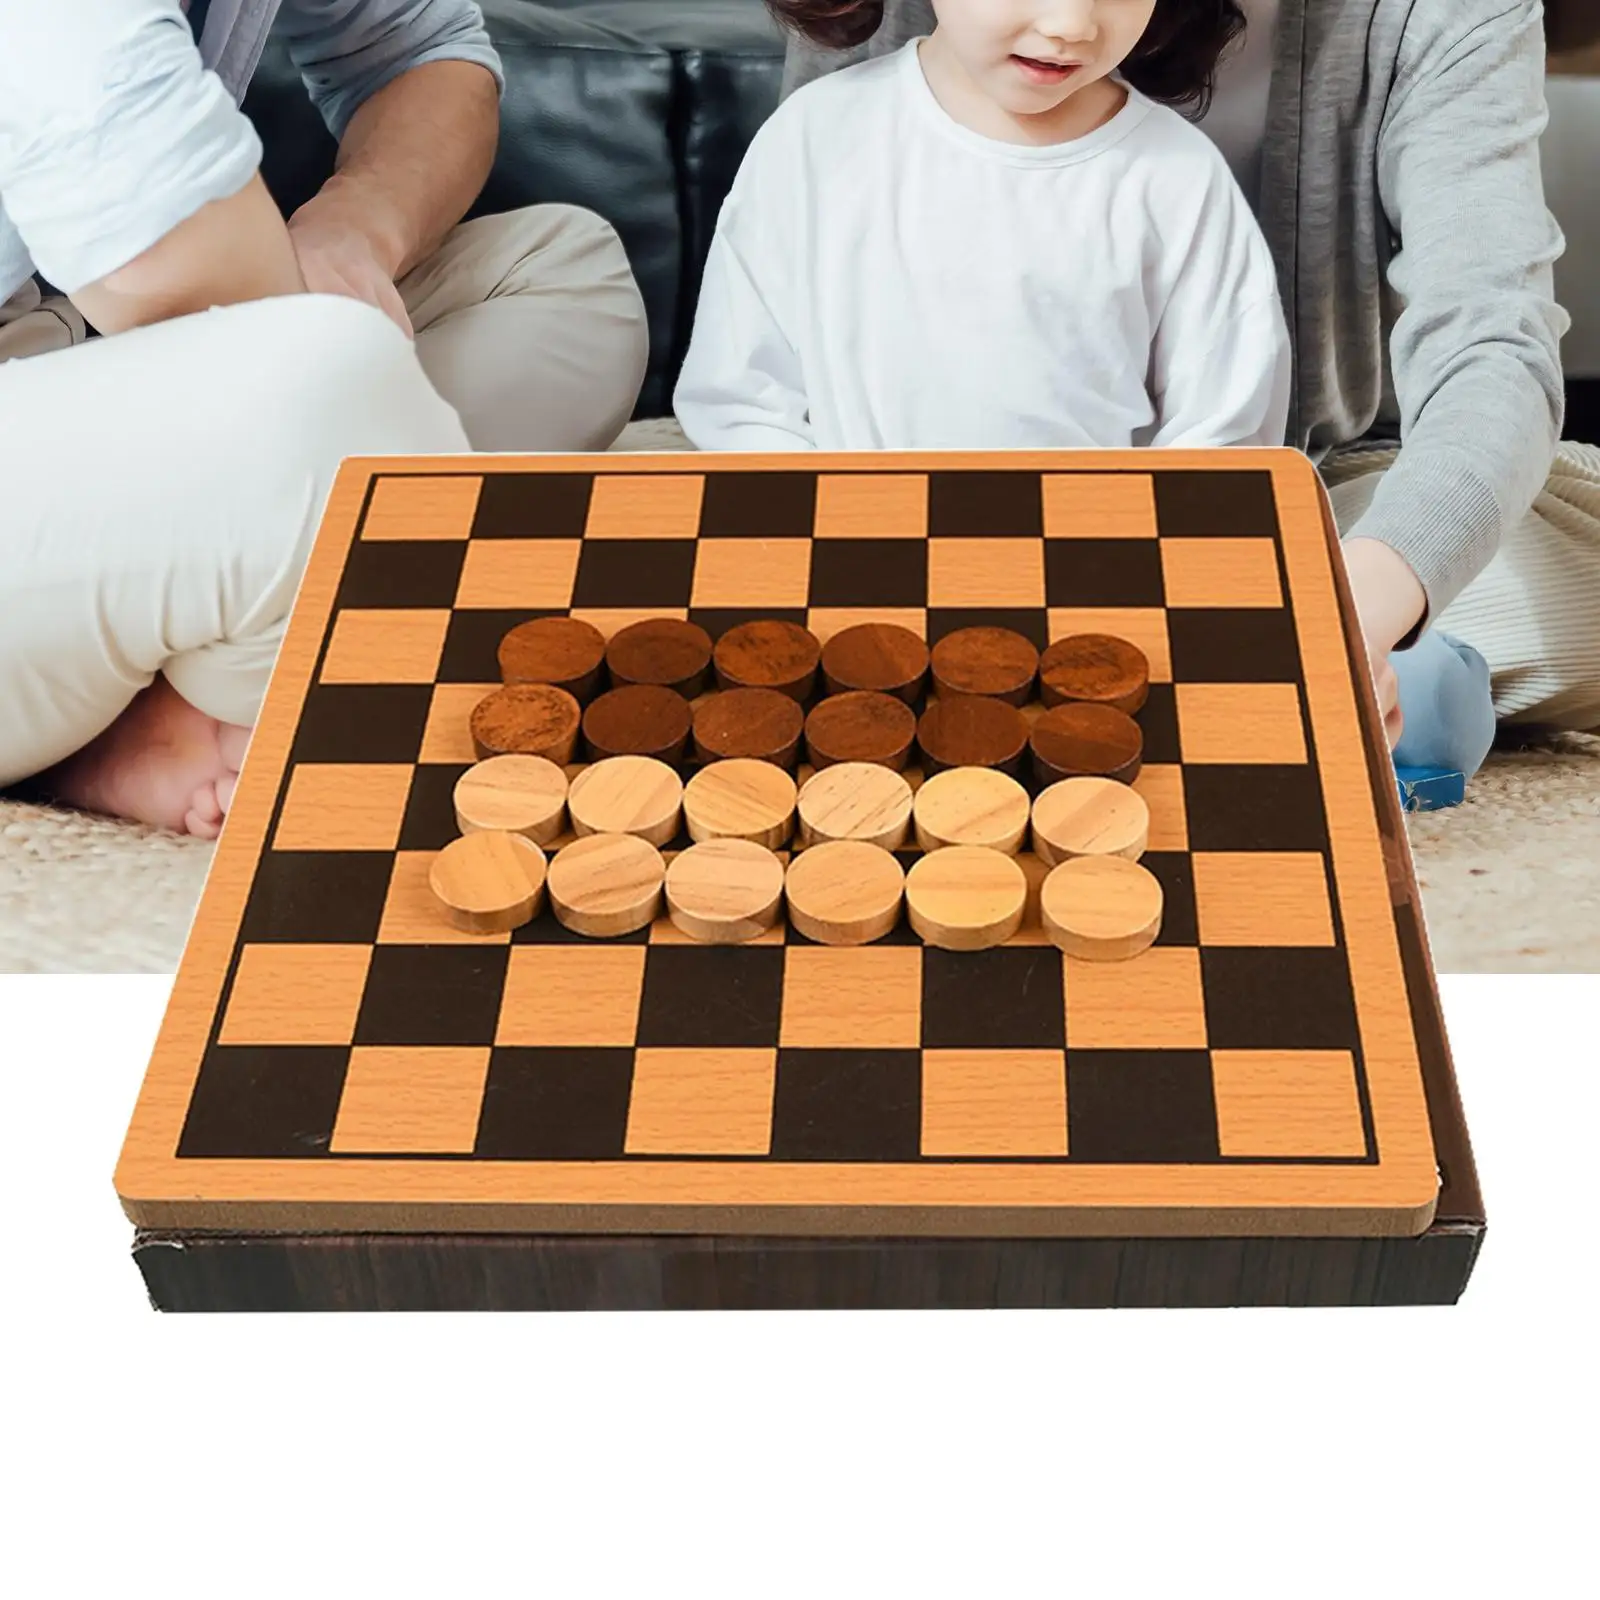 Chess Game Set Entertainment Decor Accessories Chess Board Figurine Hand Carved Piece for Kids Boys Girls Travel Desktop